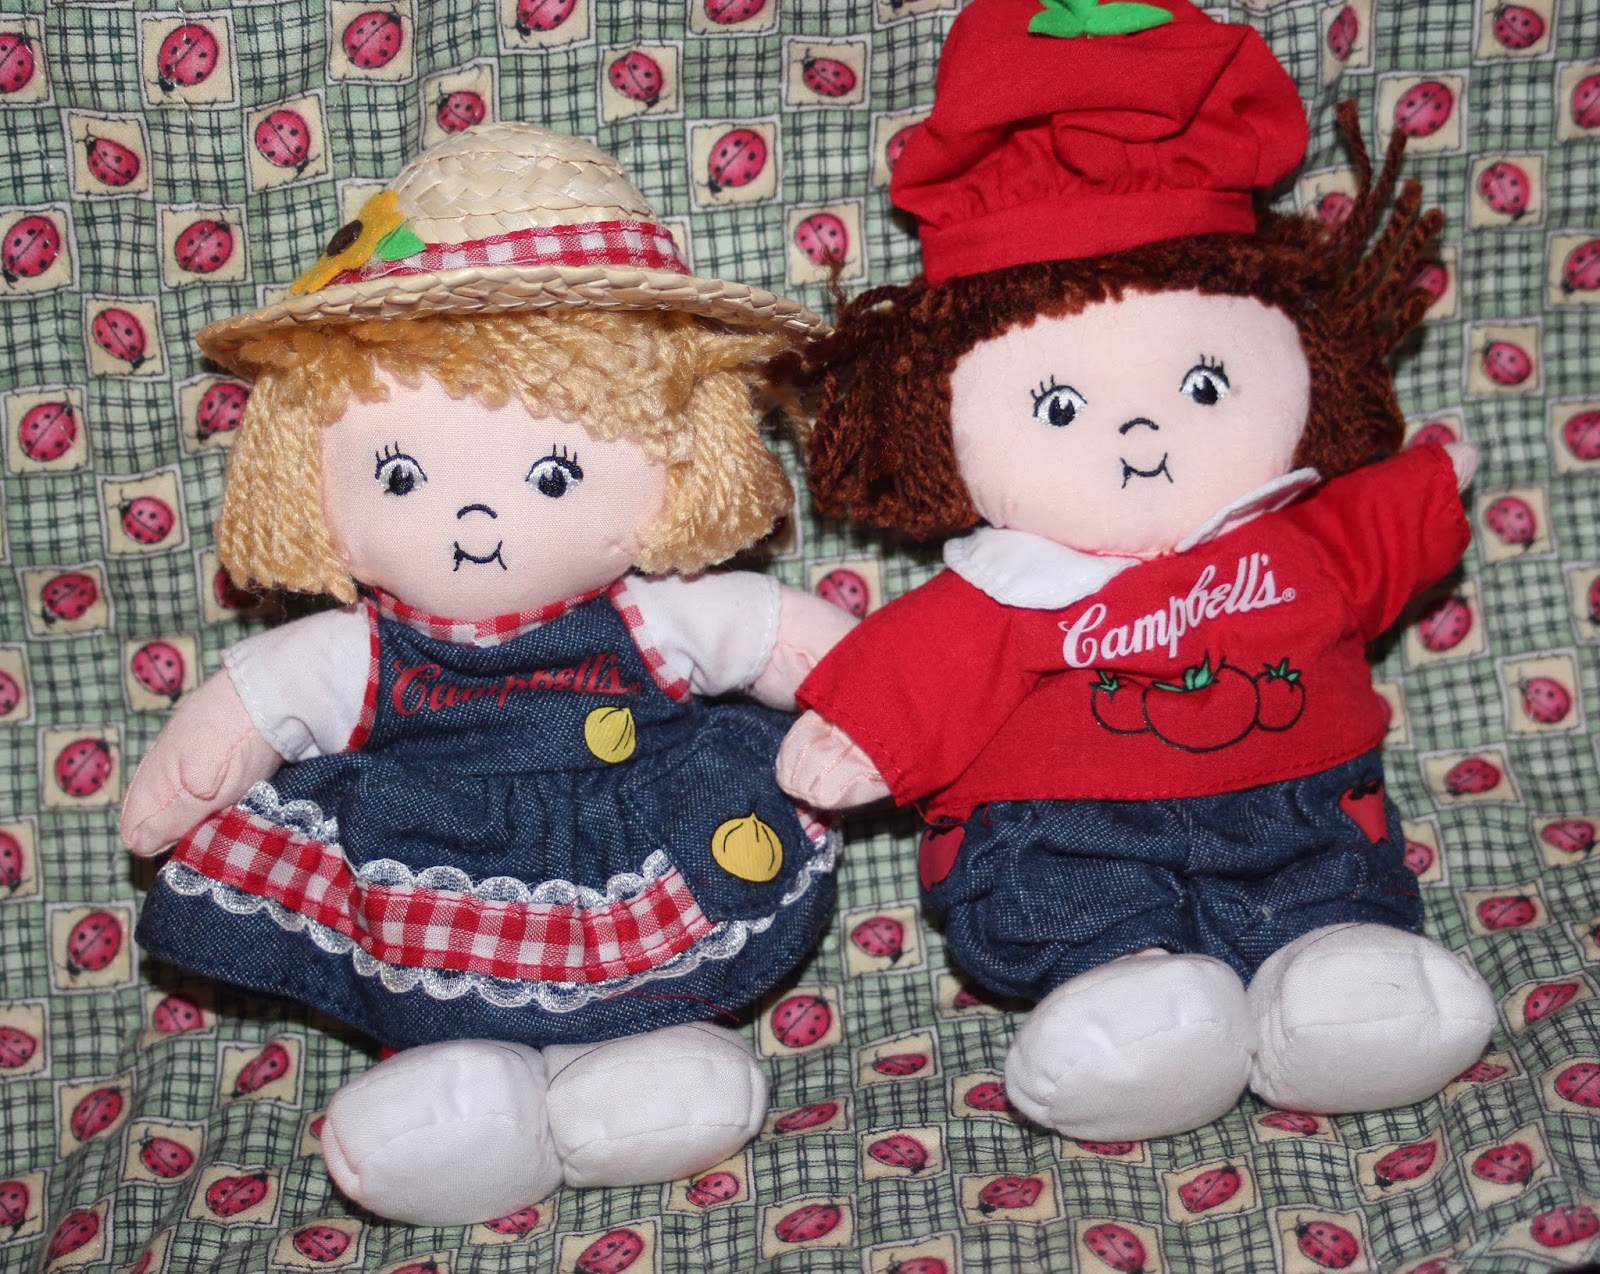 campbell's soup dolls